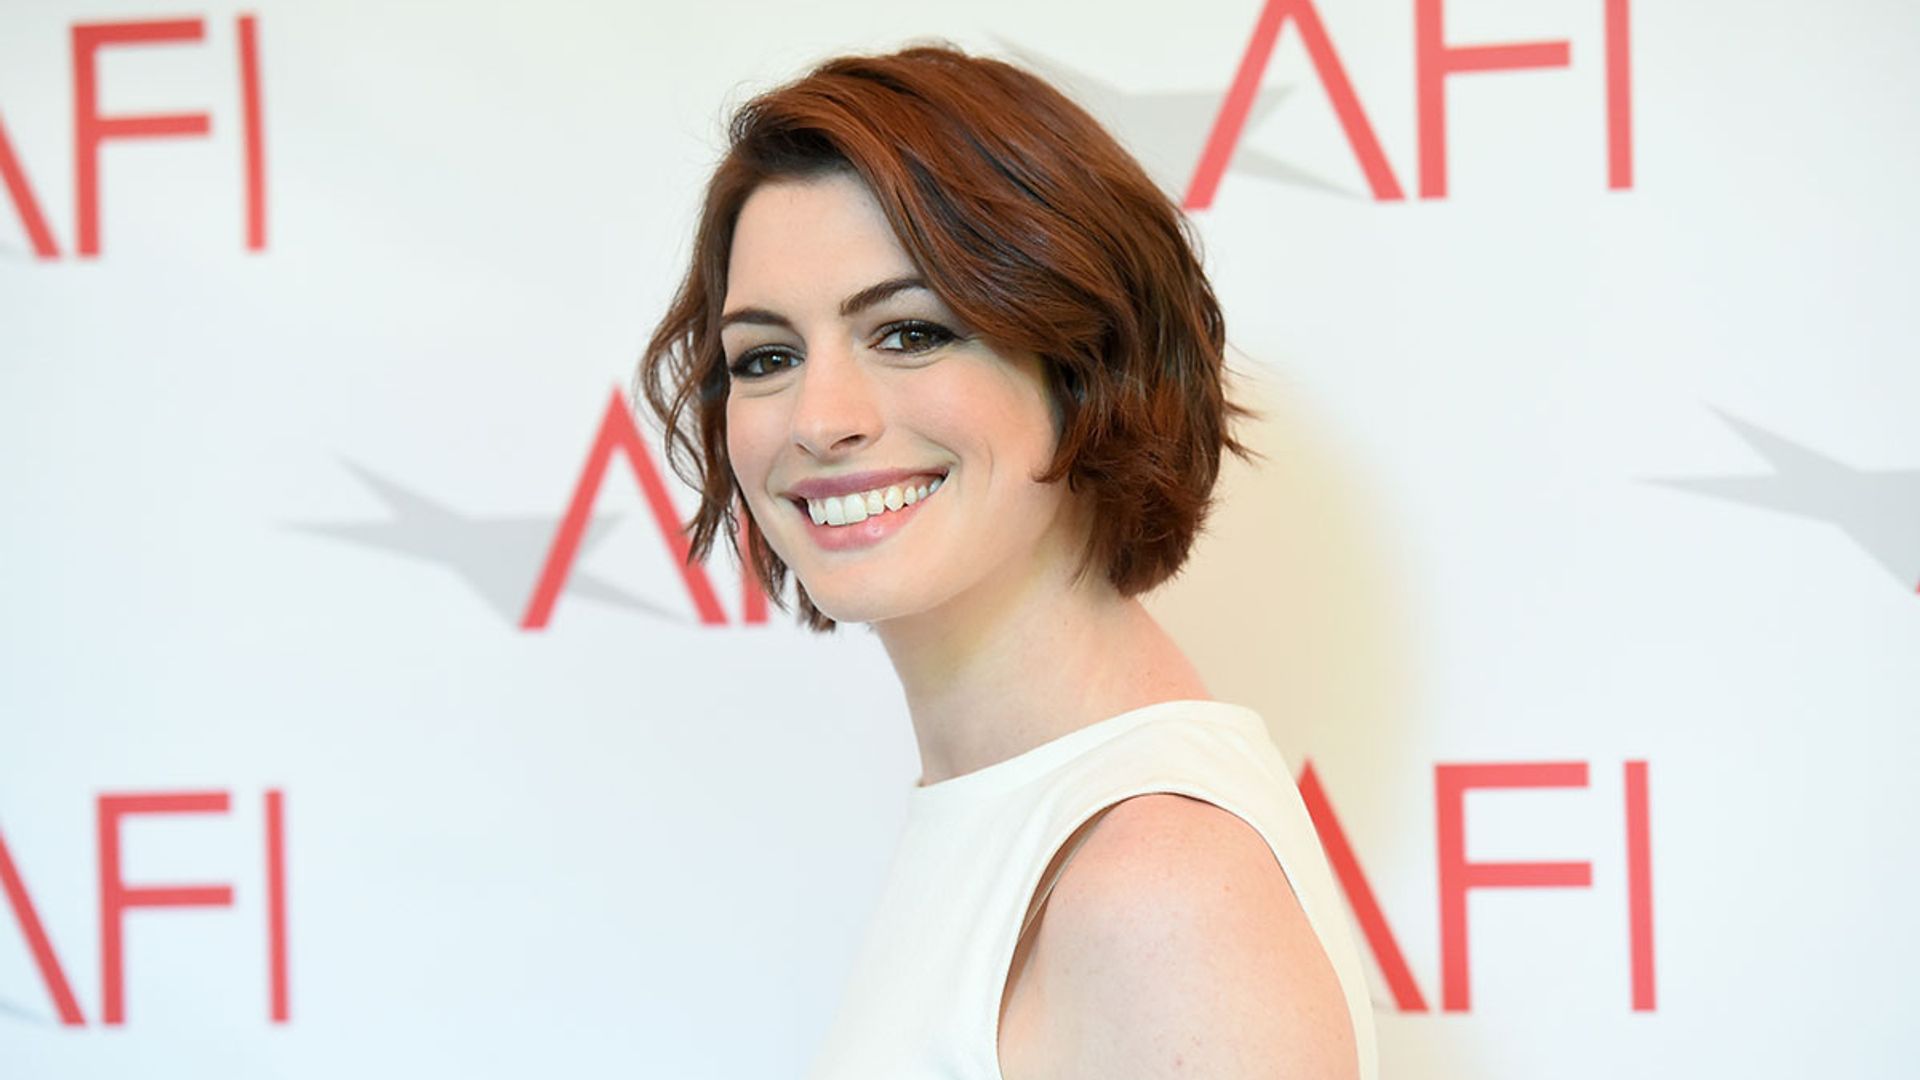 Anne Hathaway's new film halted after knife-related incident